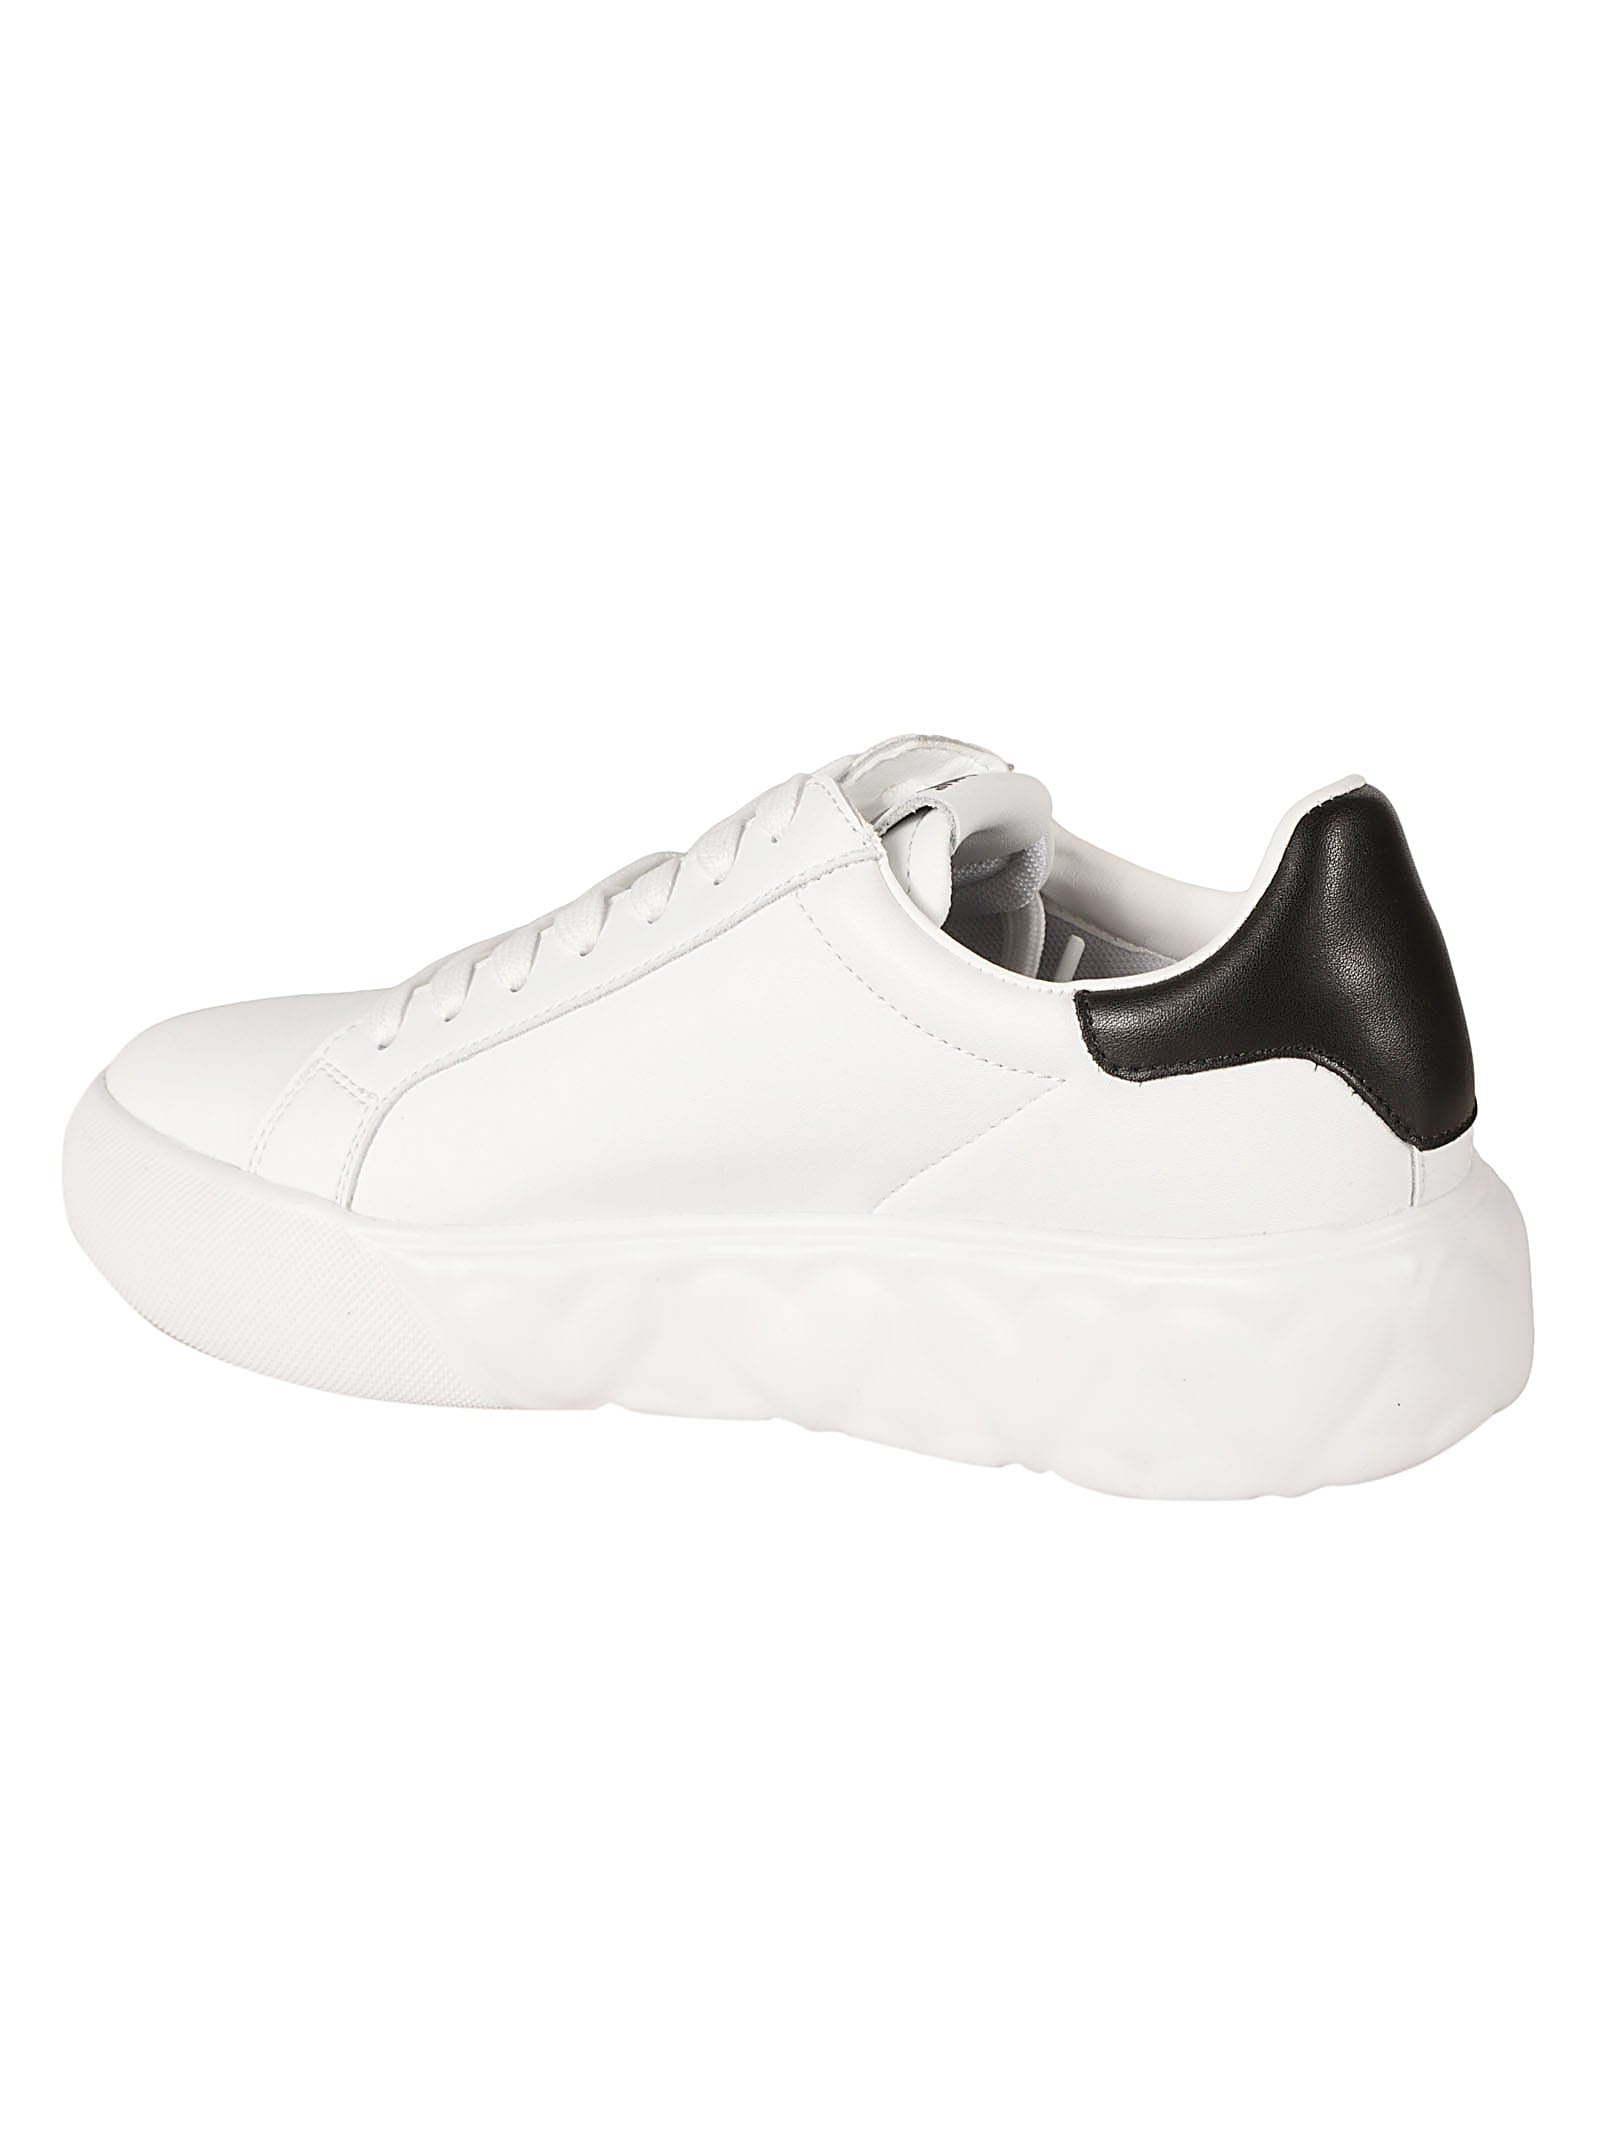 Shop Love Moschino Heart 45 Sneakers In White/black